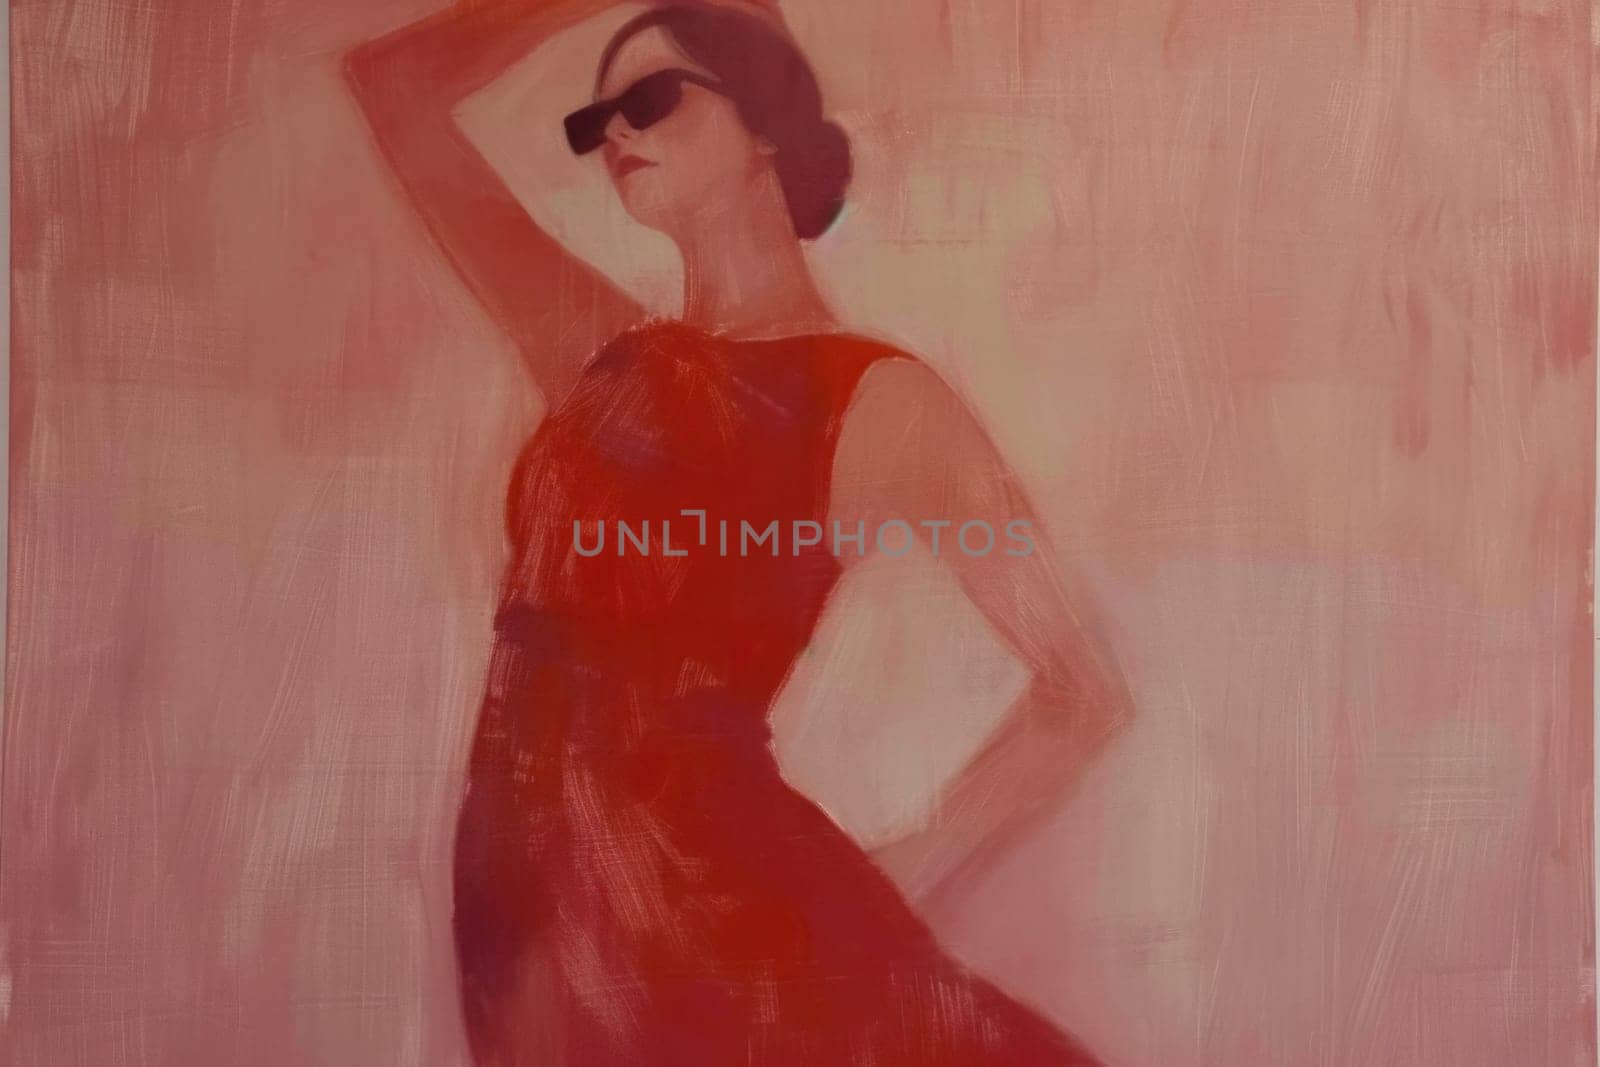 Fashion statement woman in red dress and sunglasses posing with elegance and style in artistic painting by Vichizh